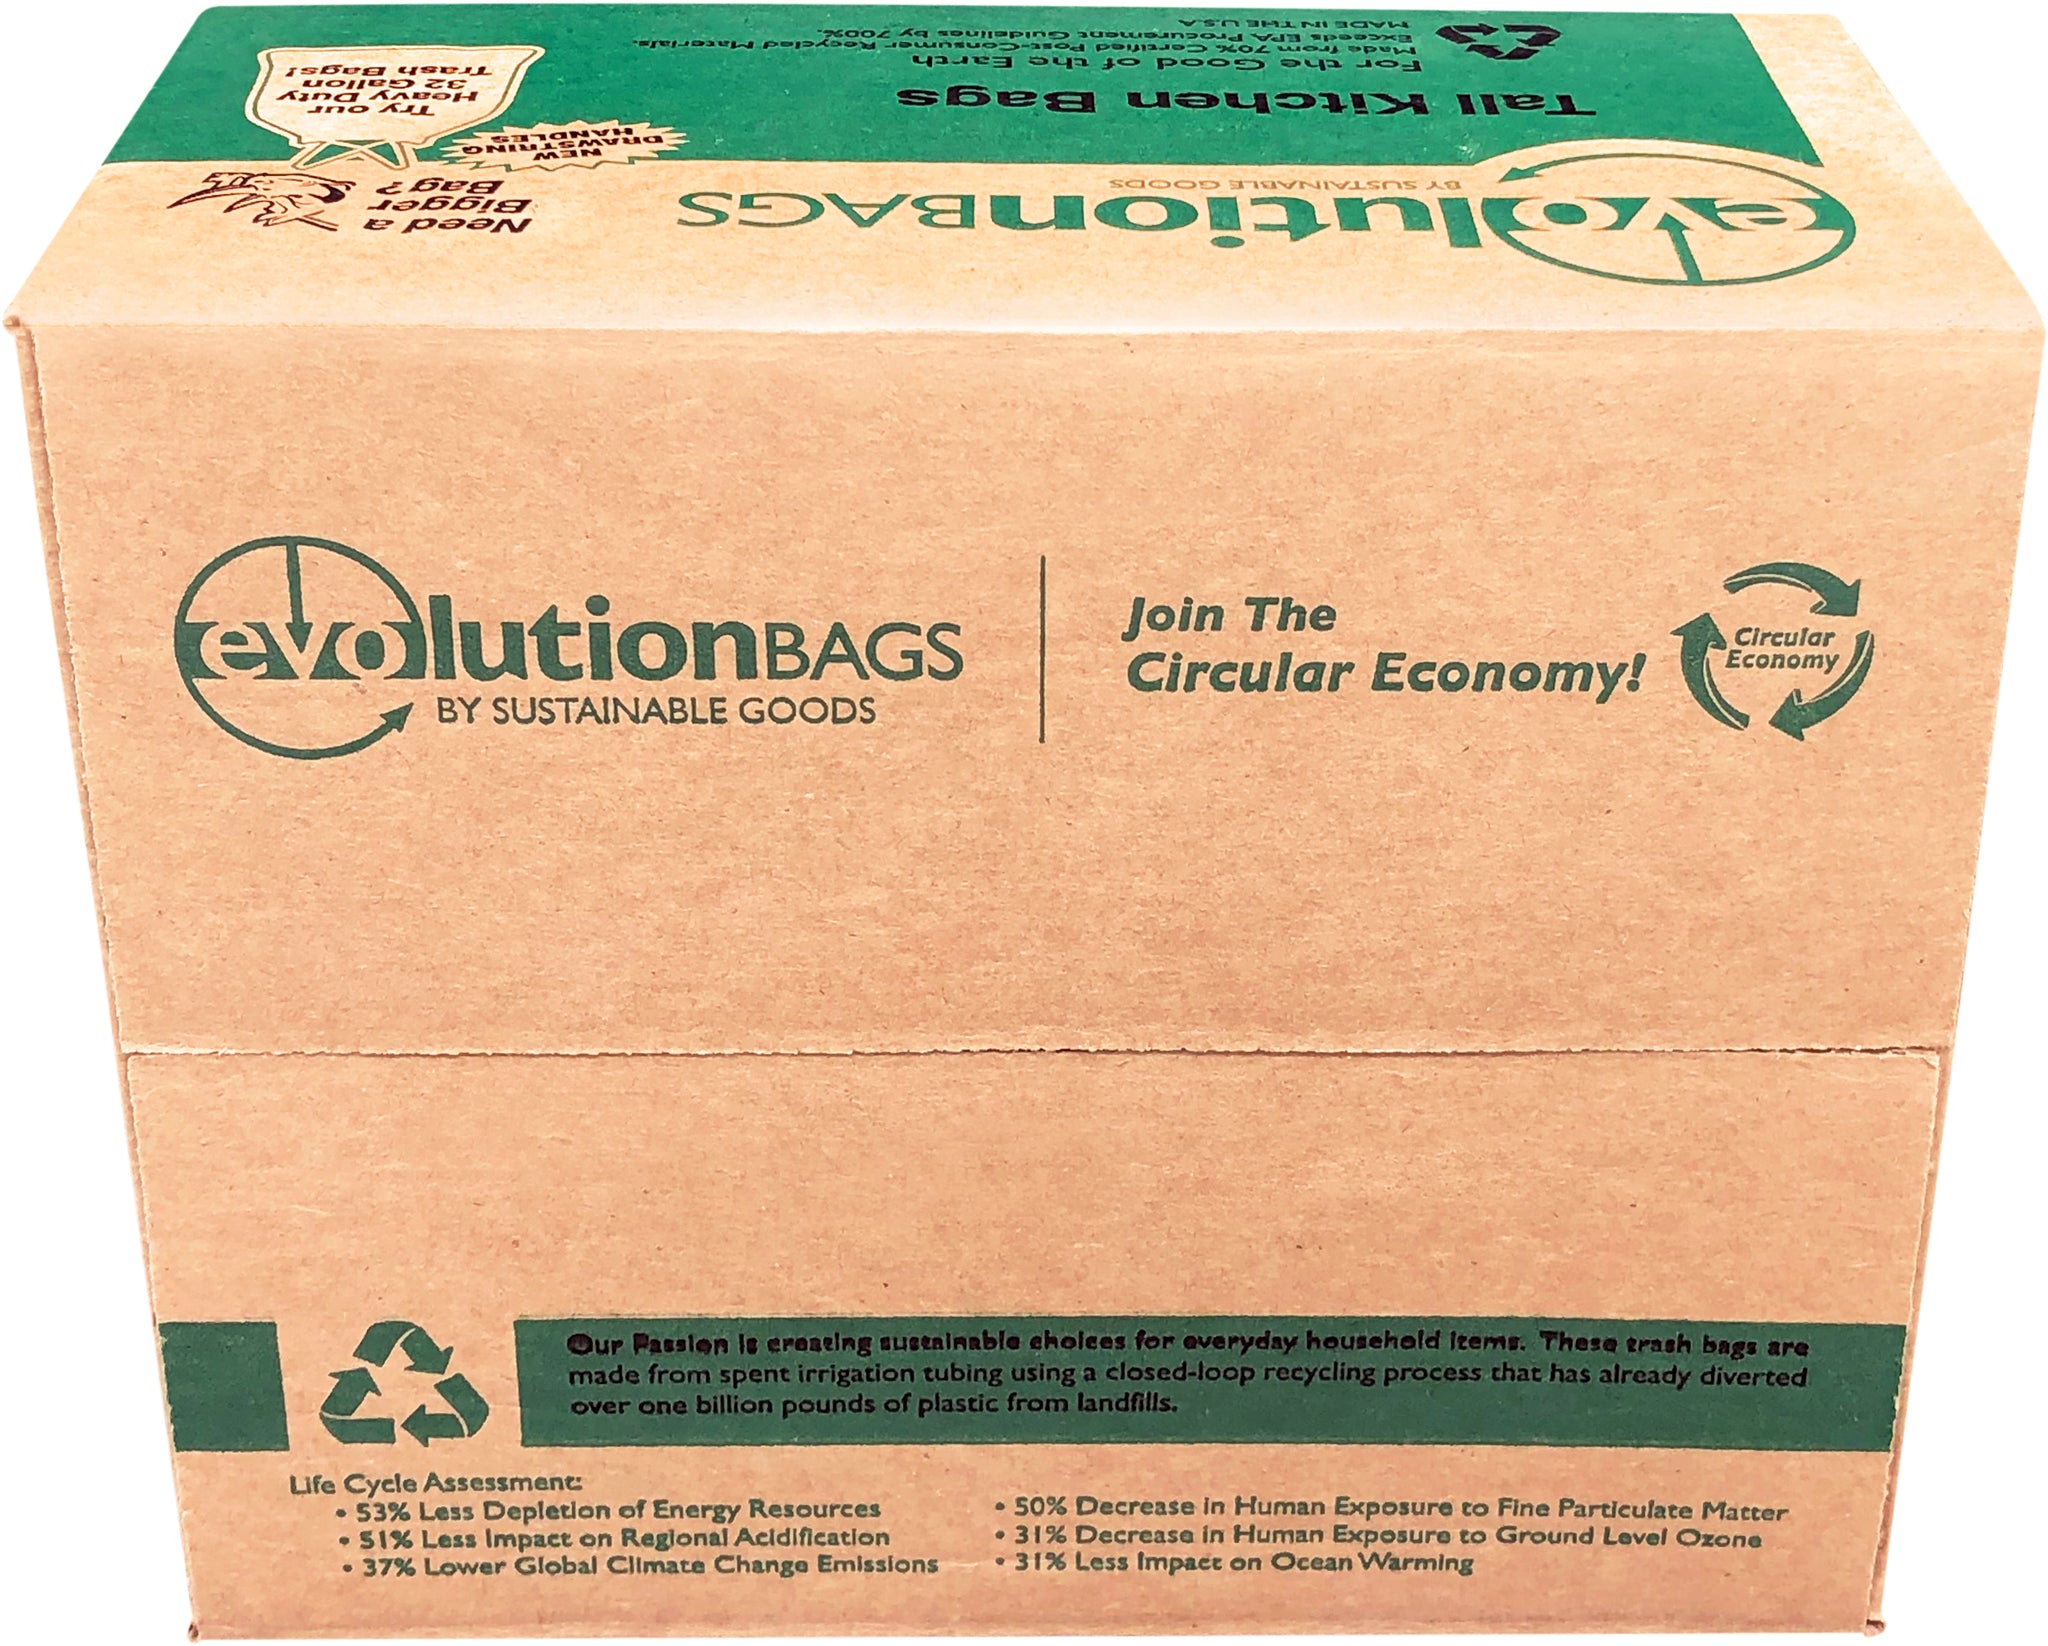 Earthsense Commercial Recycled Tall Kitchen Bags, 13-16 Gallon - 150 count